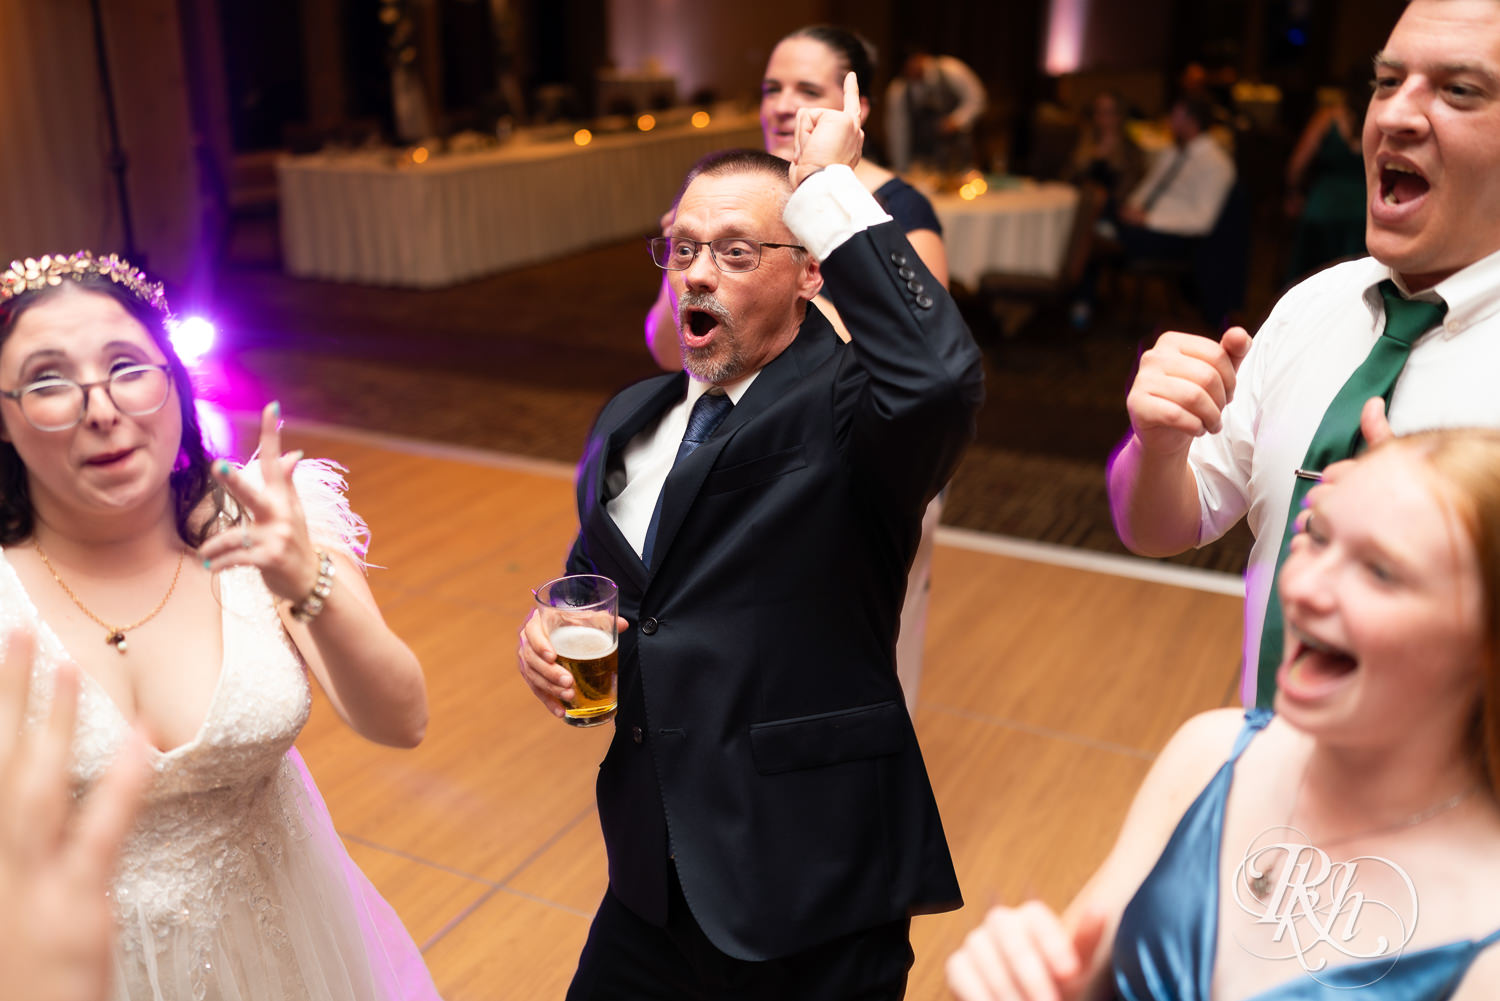 Guests dance with bride and groom during wedding reception at Bunker Hills Event Center in Coon Rapids, Minnesota.